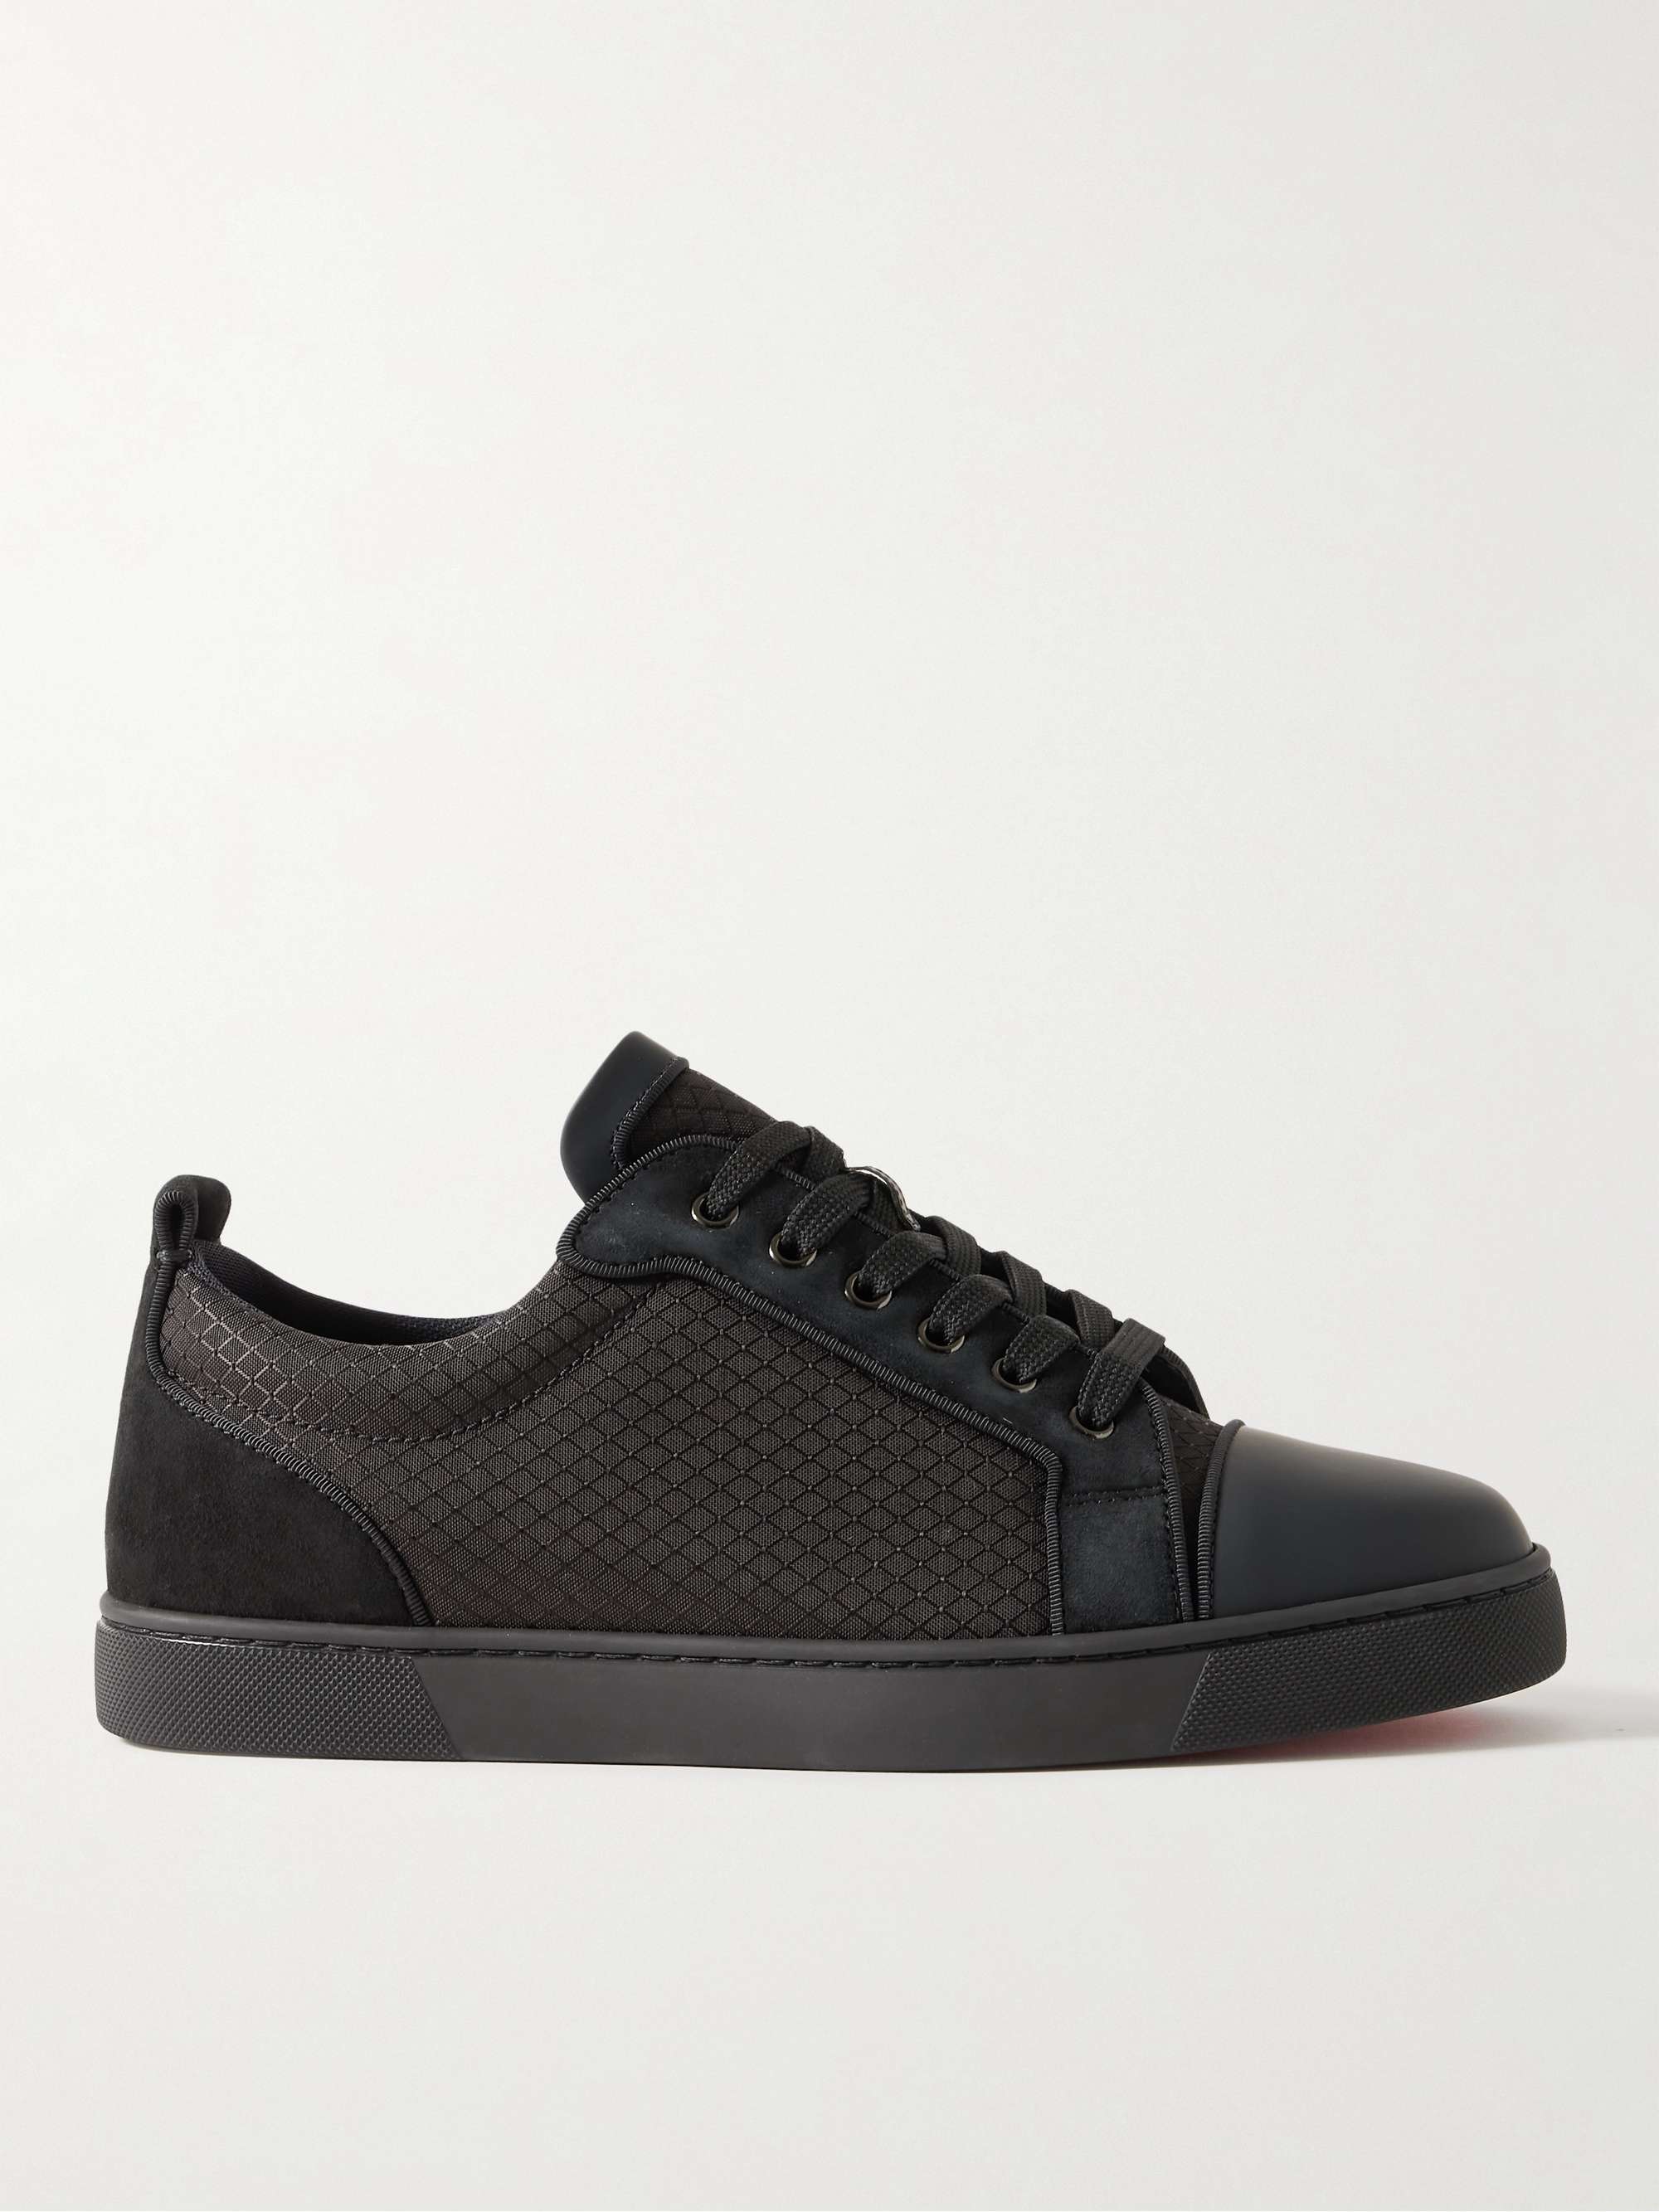 CHRISTIAN LOUBOUTIN Louis Junior Suede and Leather-Trimmed Ripstop